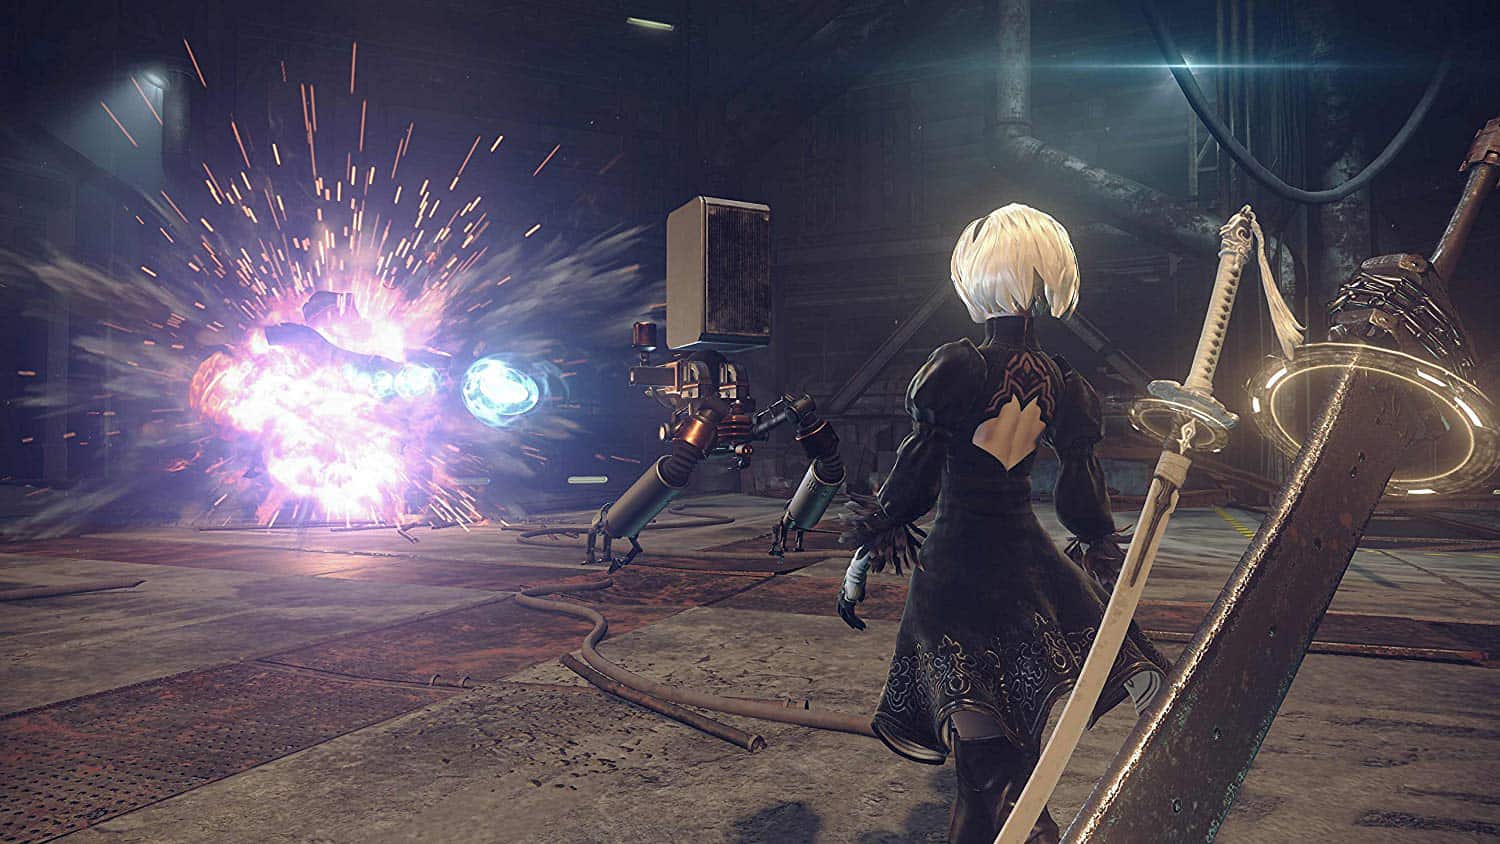 Is NieR Automata Game worth Buying